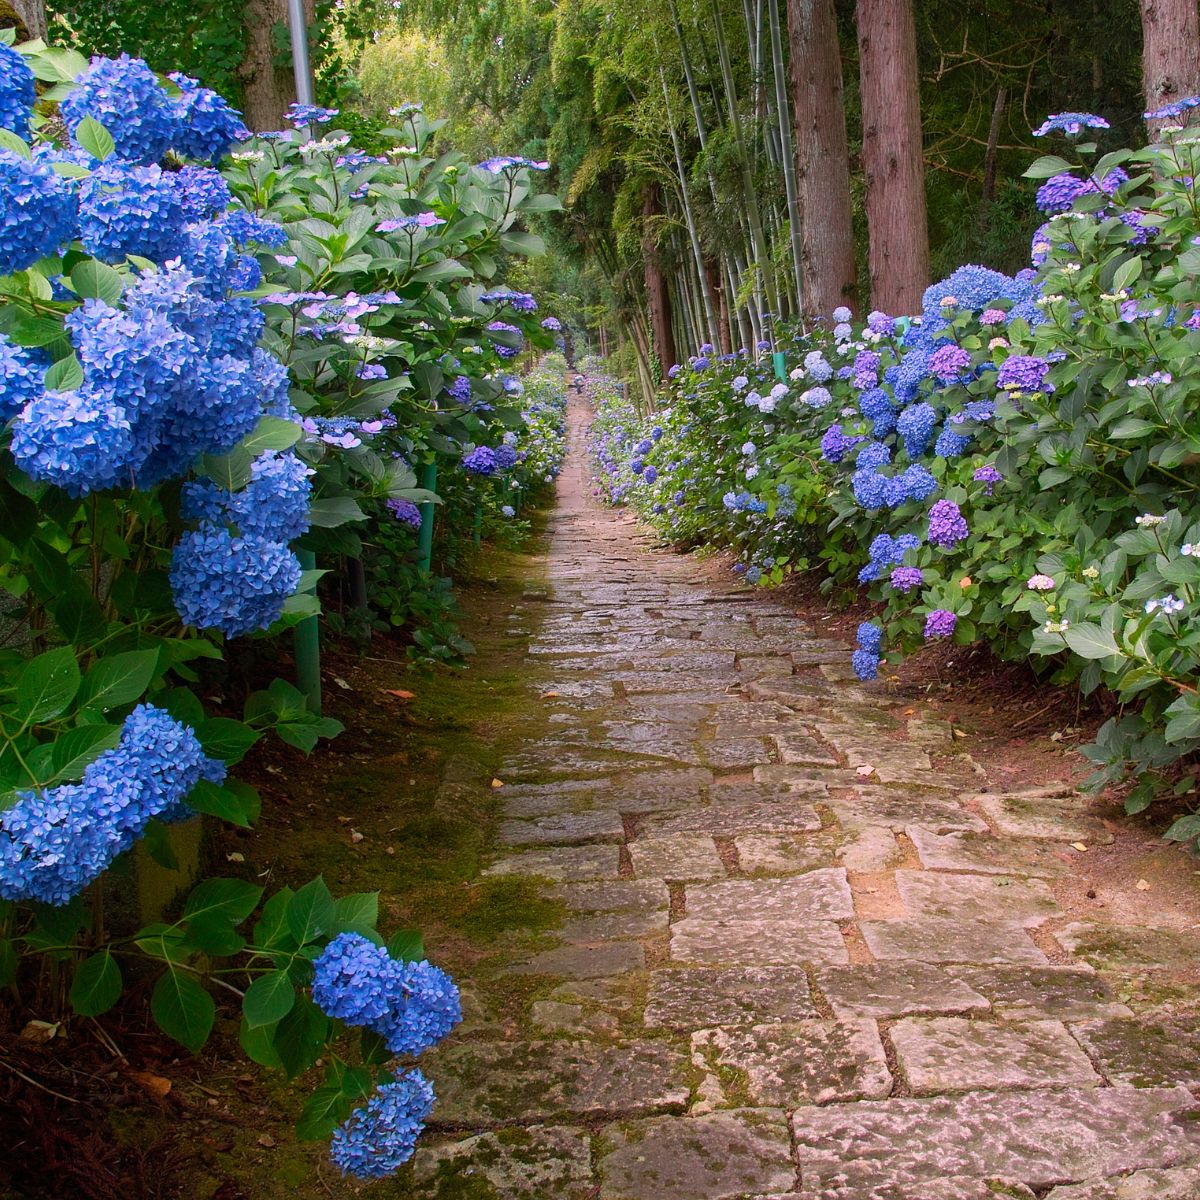 stone walkway flanked by hydrangea blooms.